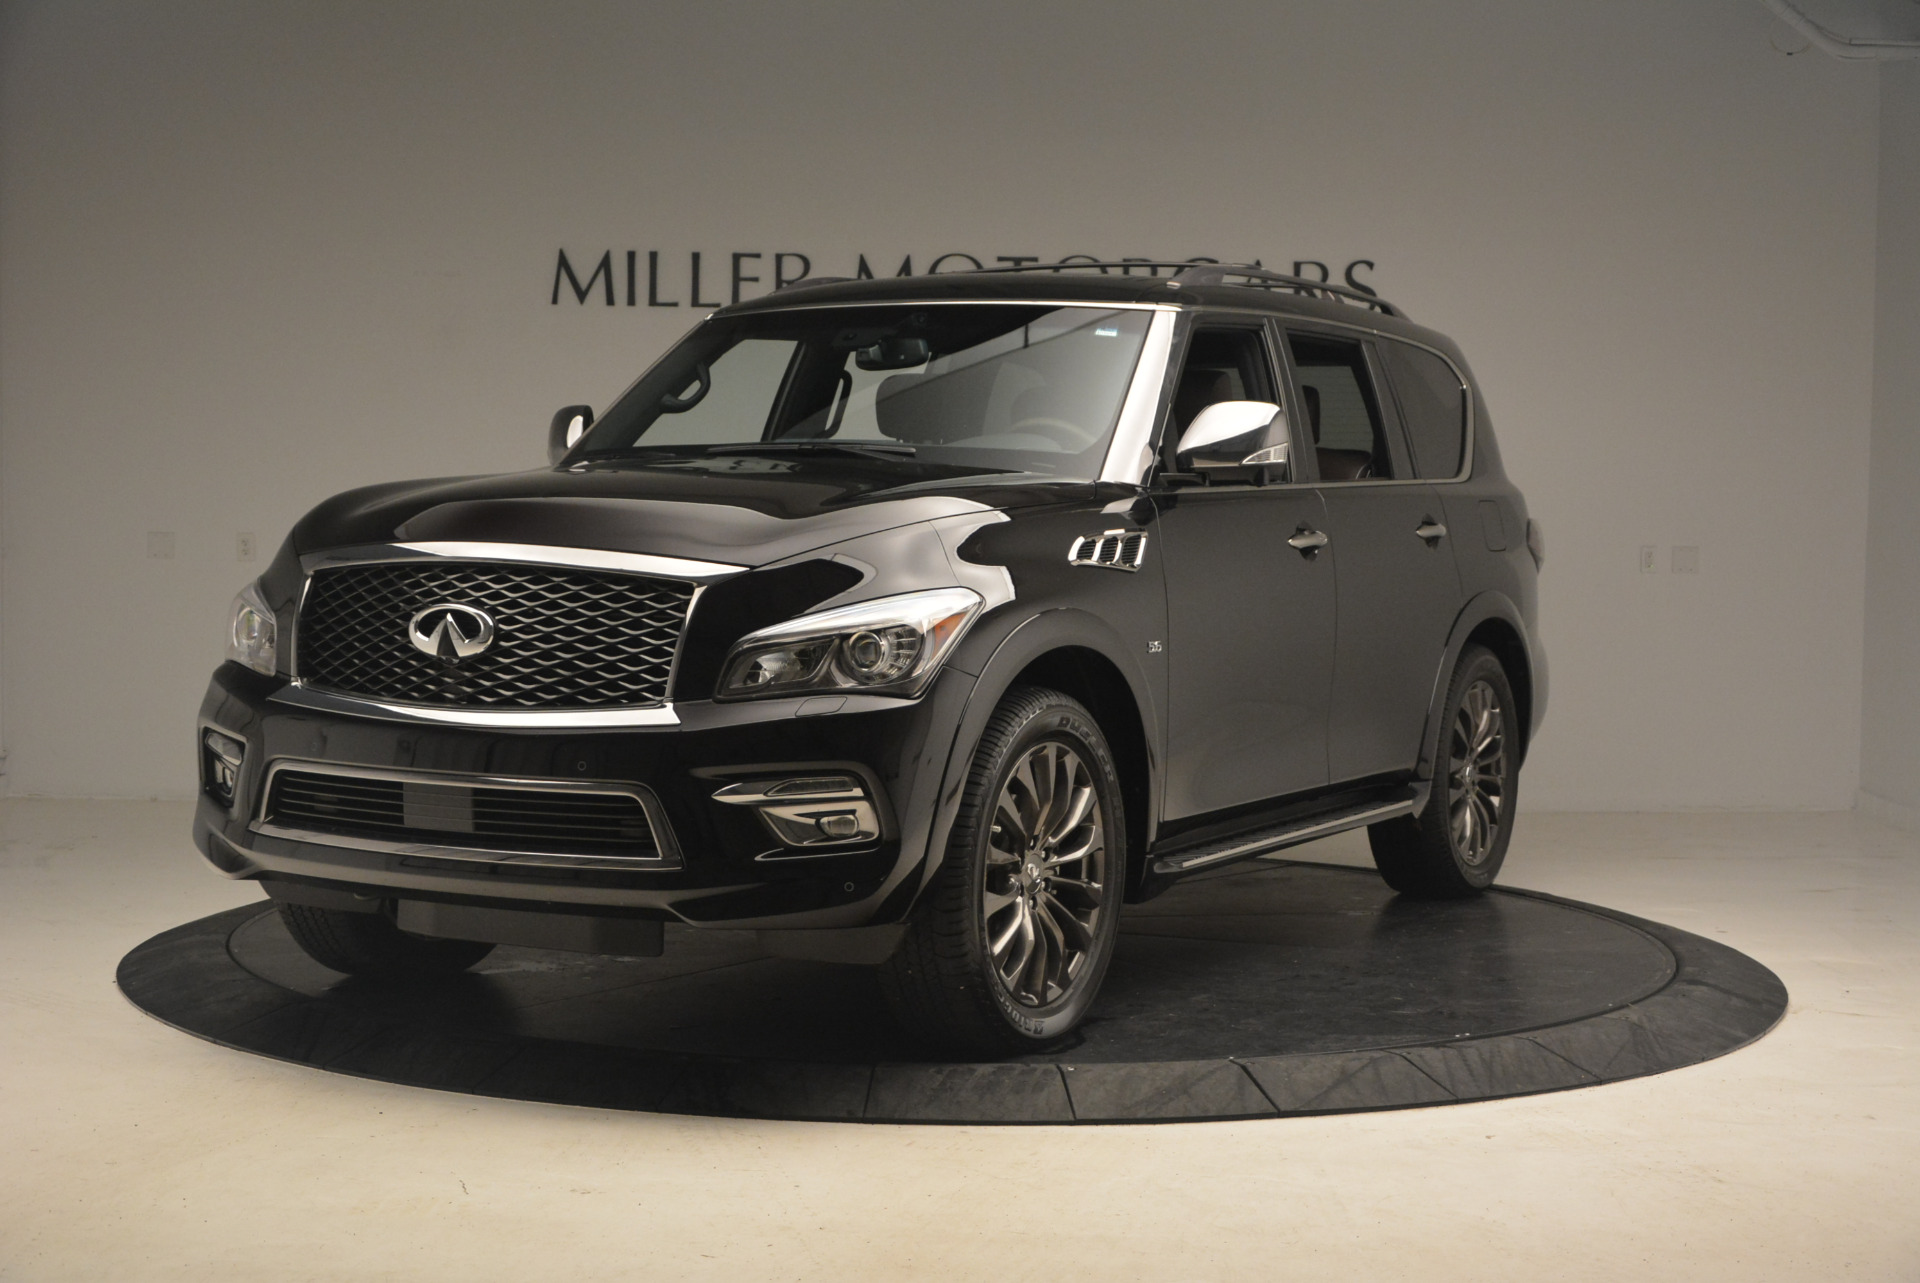 Used 2015 INFINITI QX80 Limited 4WD for sale Sold at Aston Martin of Greenwich in Greenwich CT 06830 1